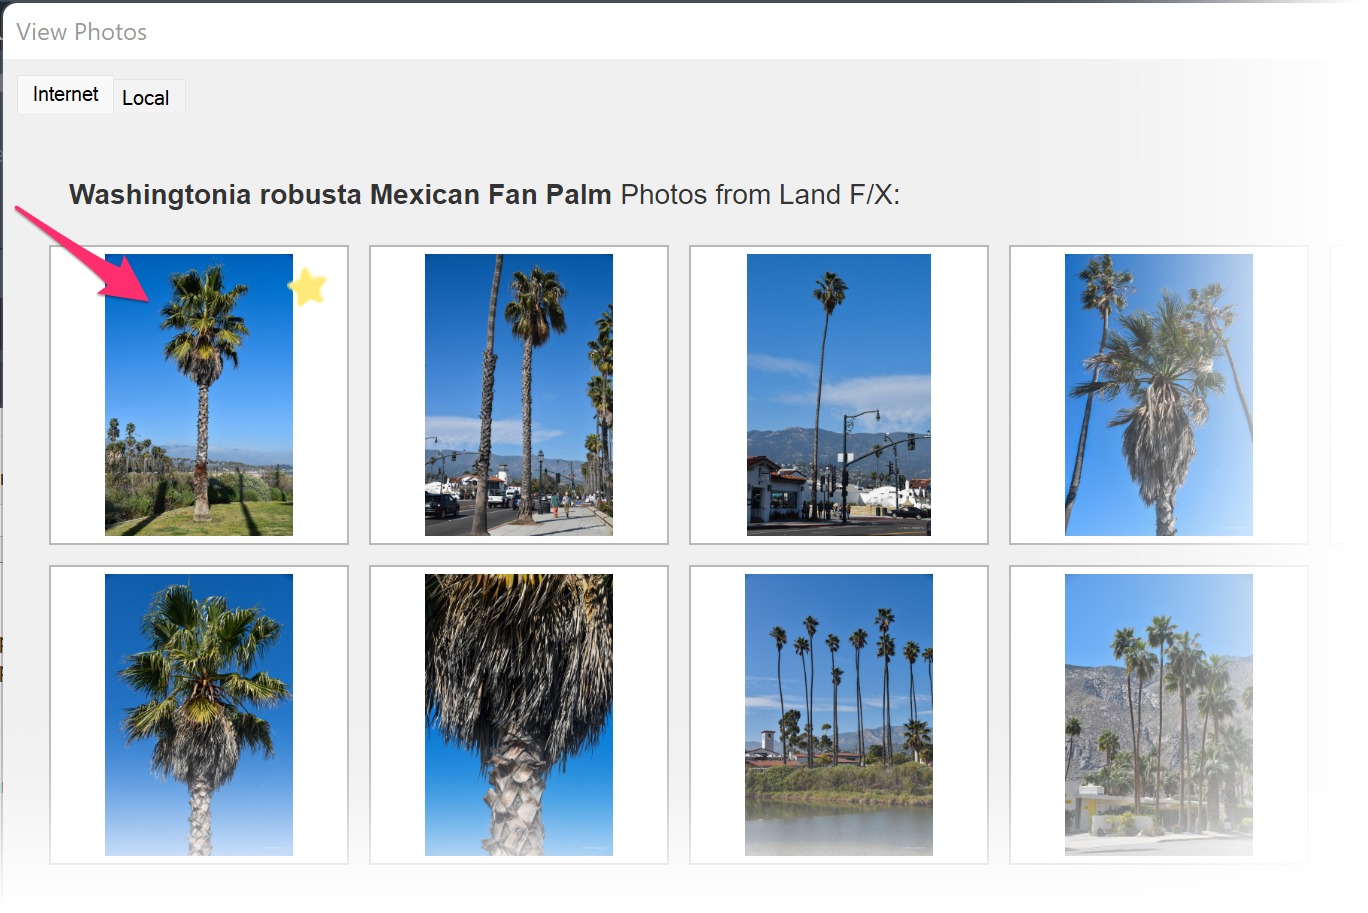 Selecting a plant photo in the View Photos dialog box